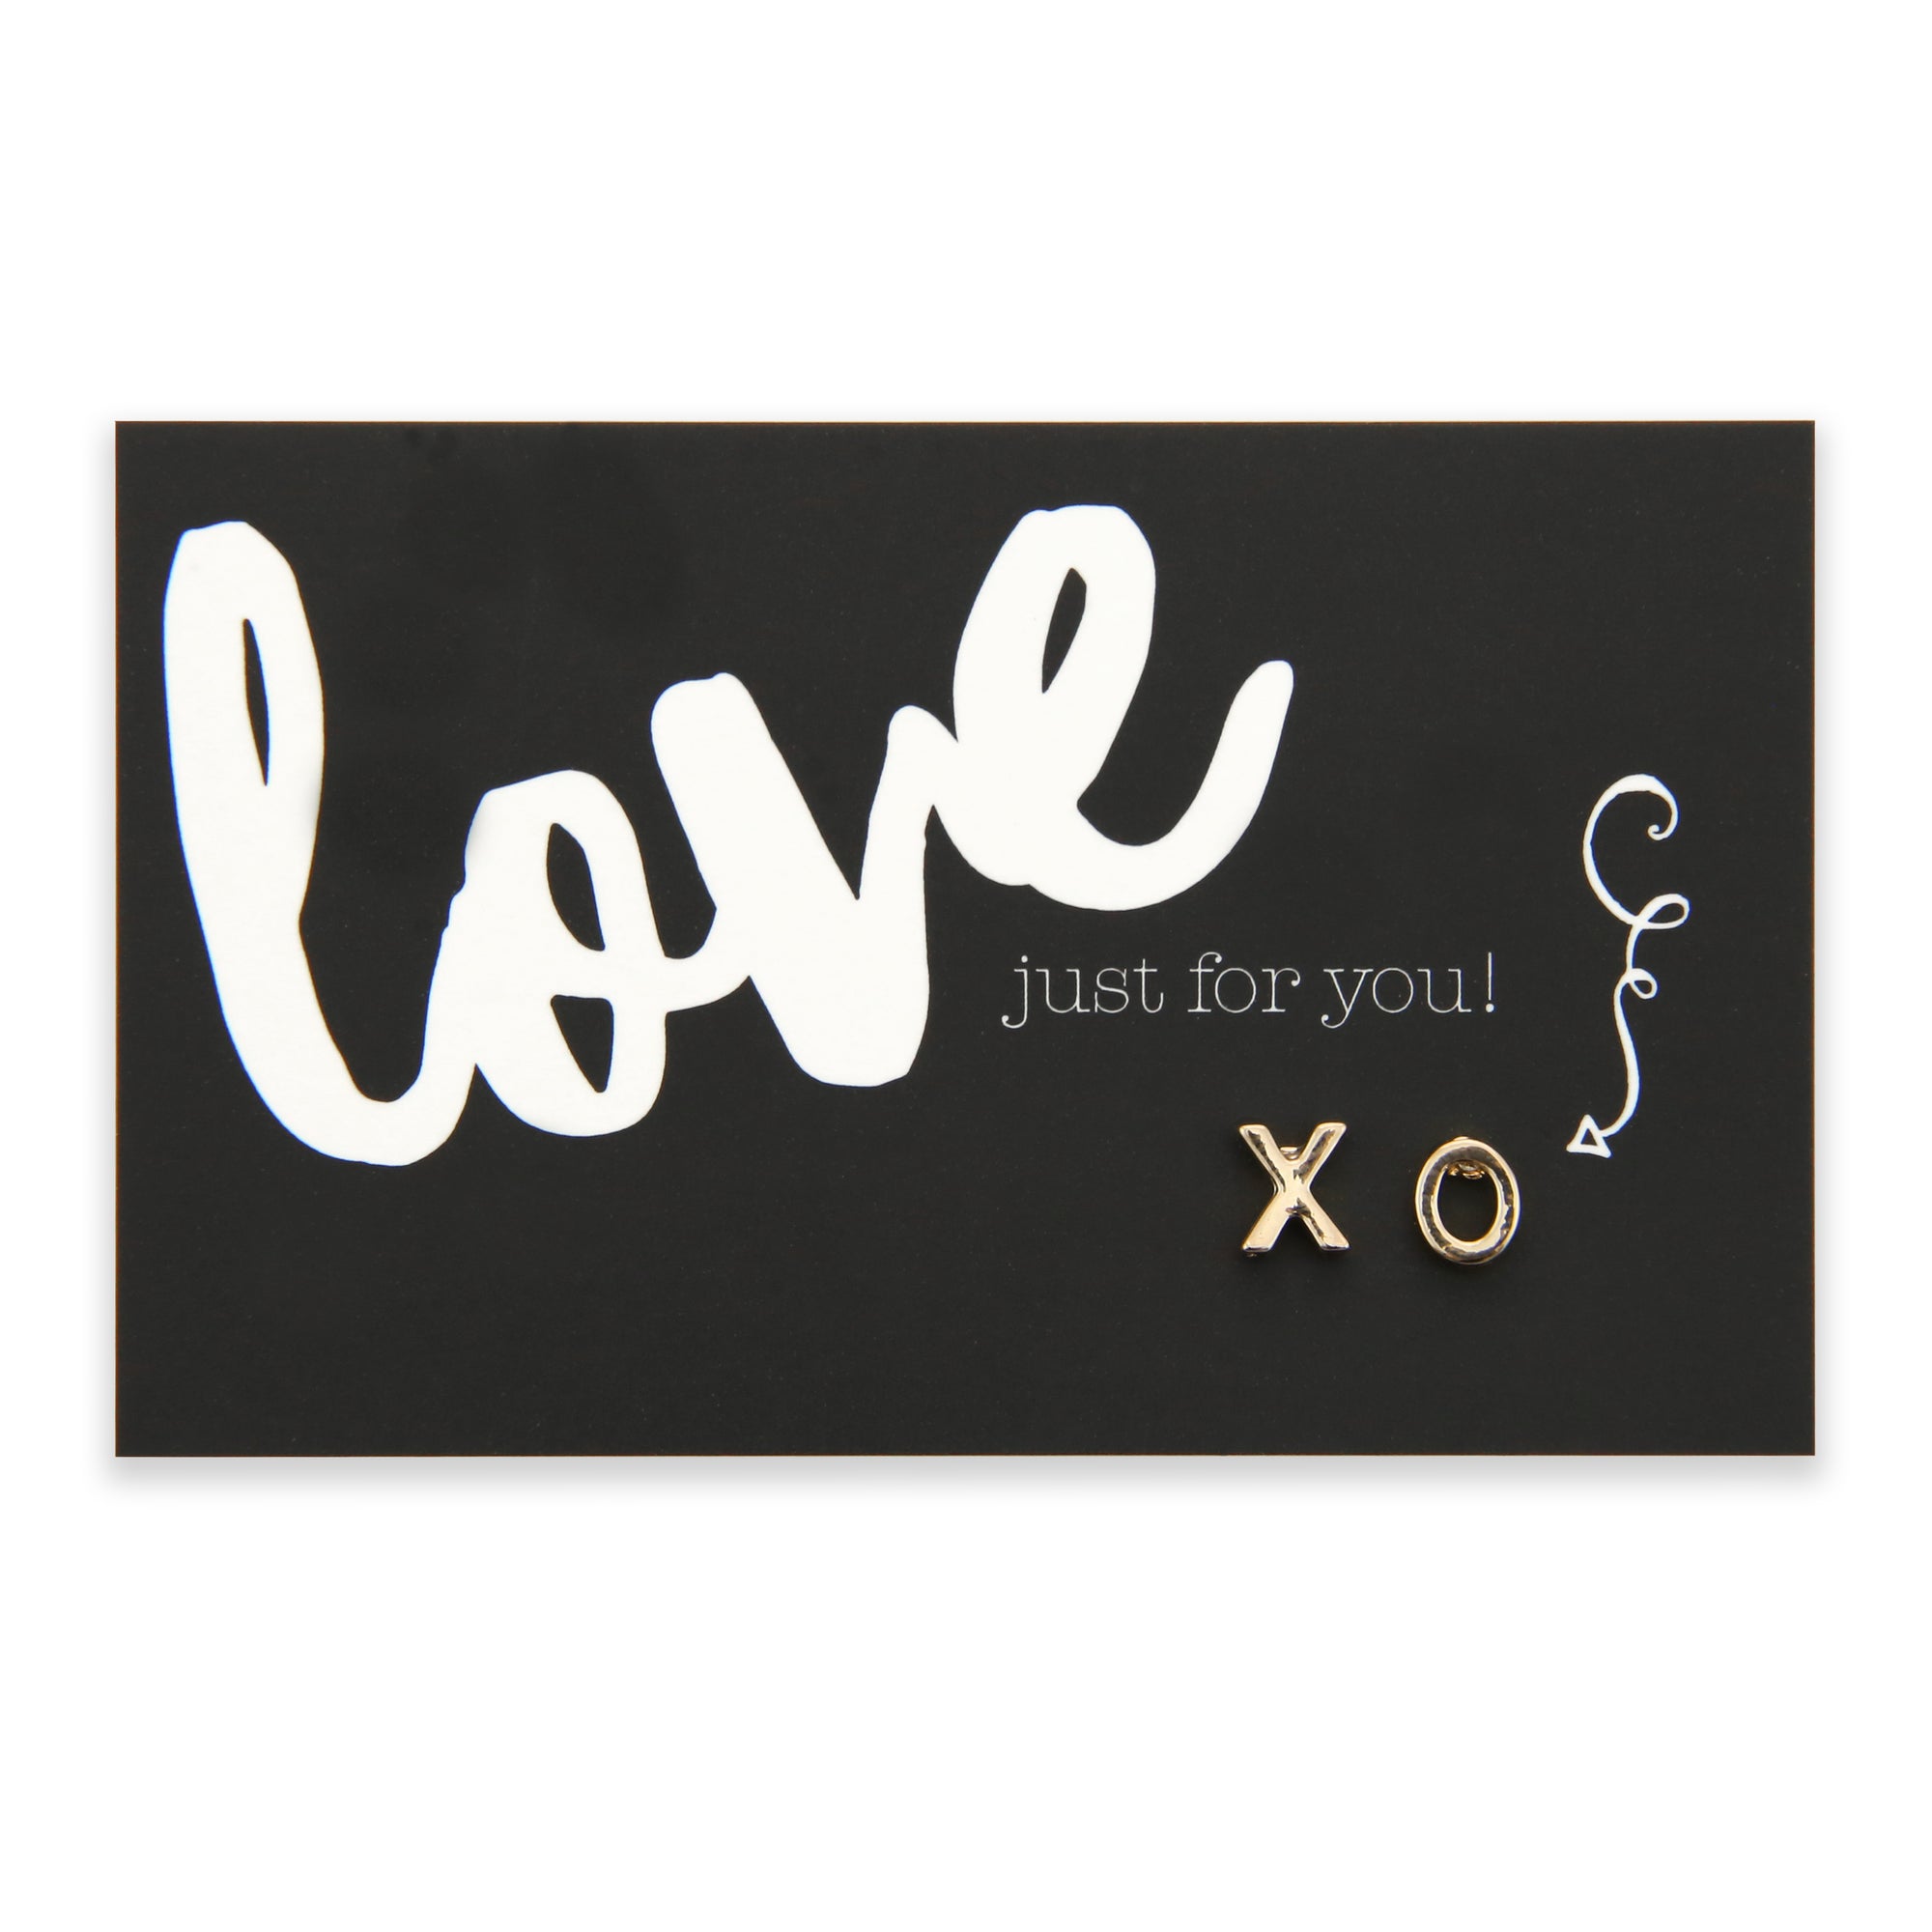 X&0s earring studs in gold on Love just for you card 